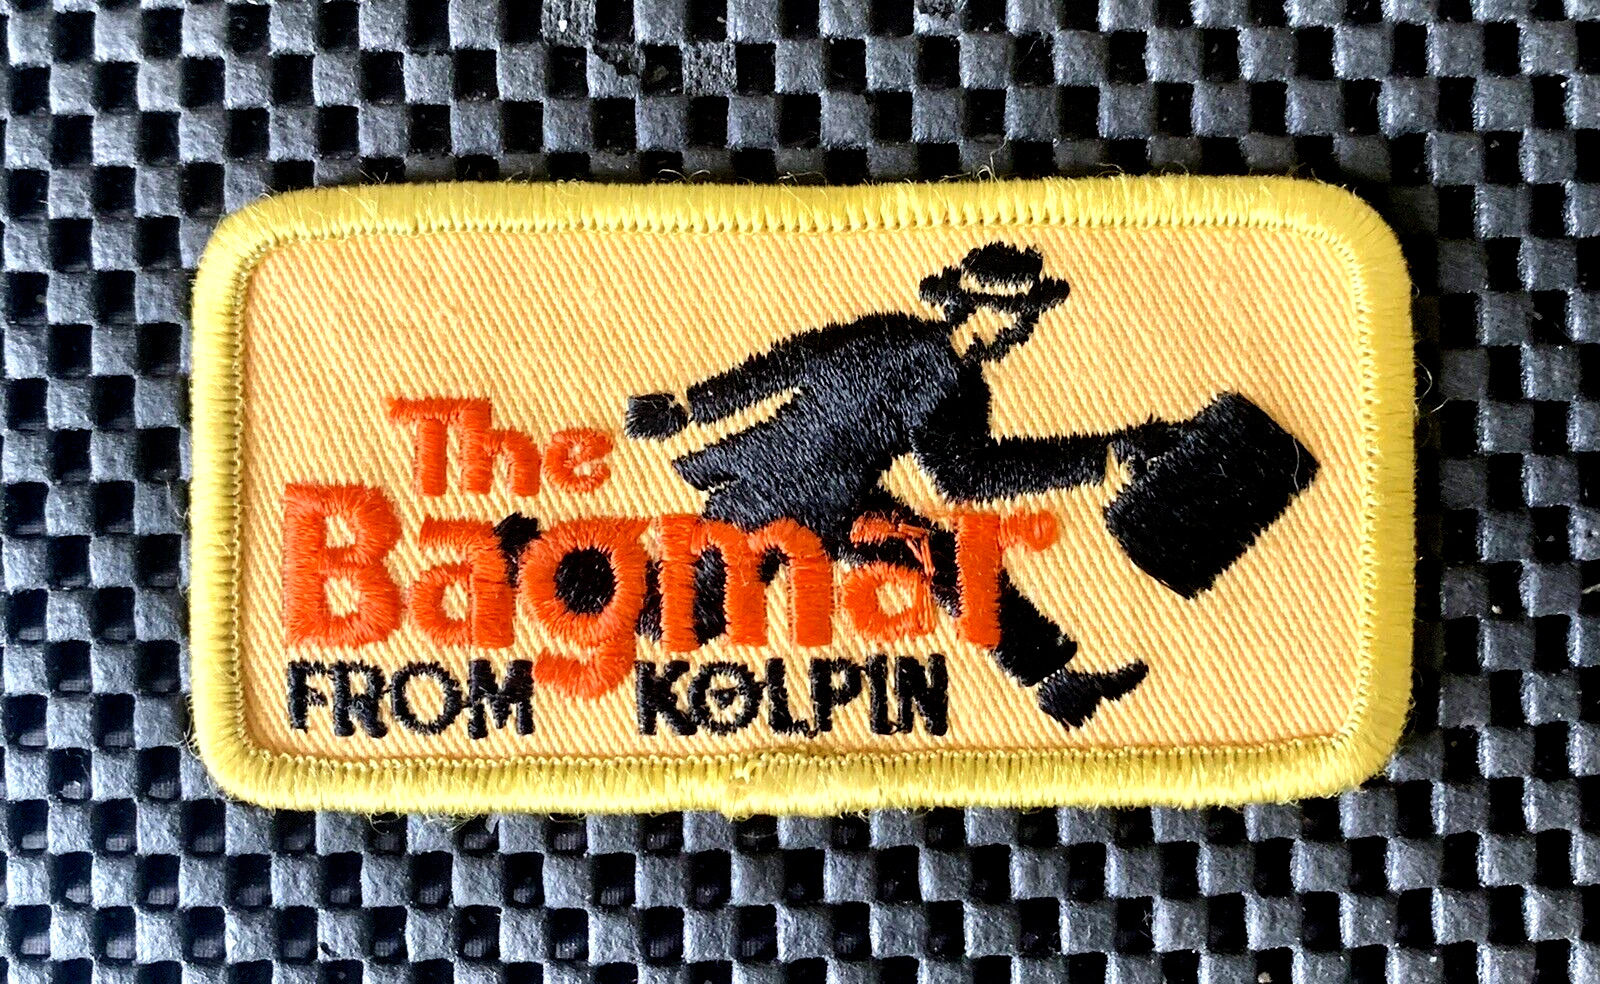 THE BAGMAR FROM KOLPIN EMBROIDERED SEW ON ONLY PATCH ATV ACCESSORIES 4\